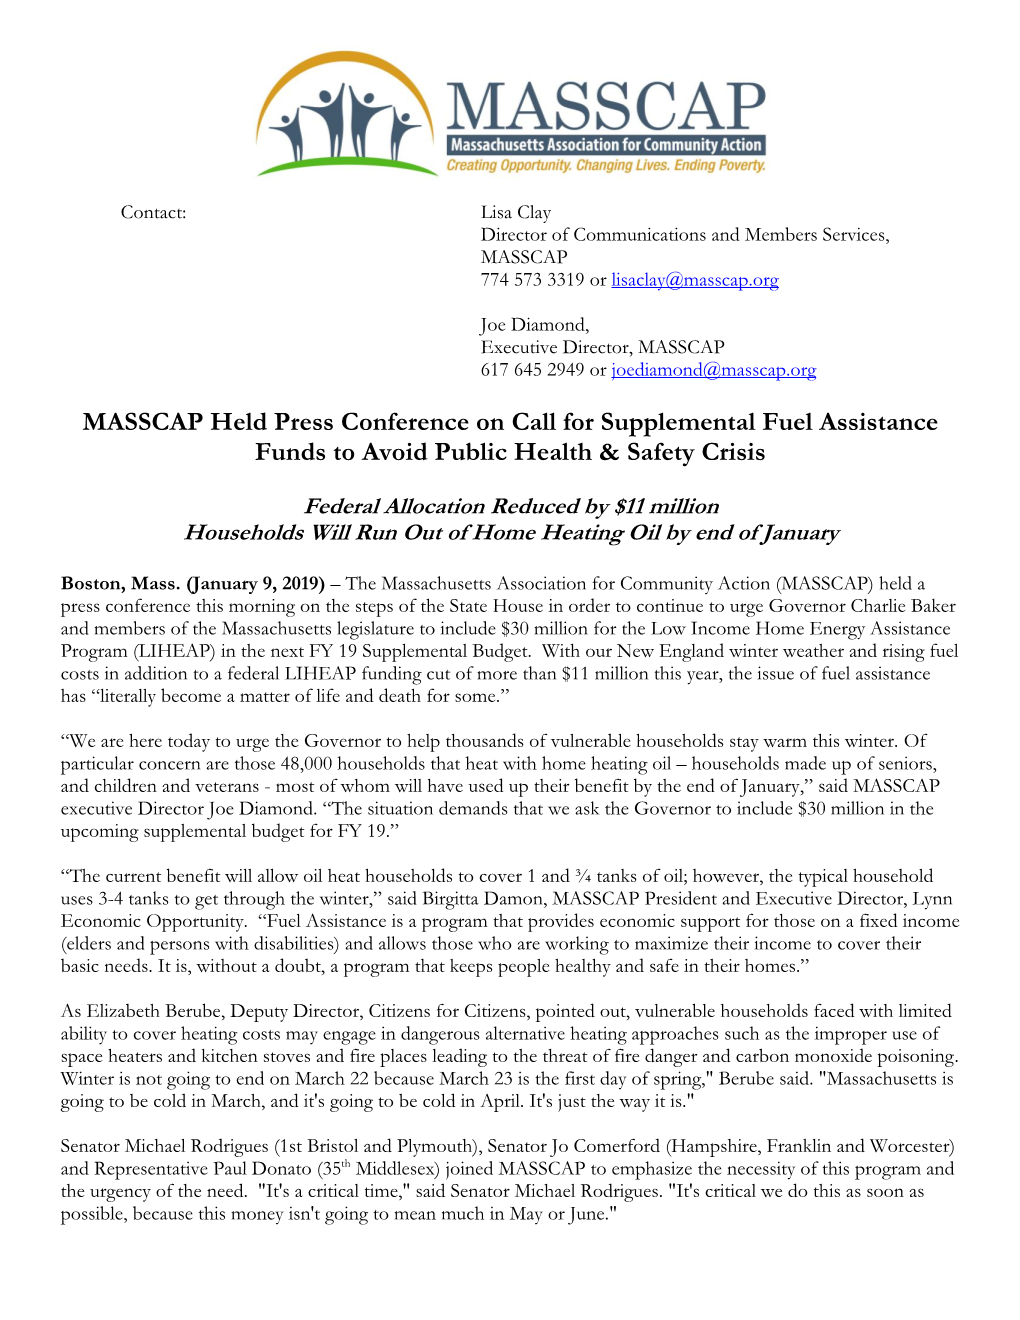 MASSCAP Held Press Conference on Call for Supplemental Fuel Assistance Funds to Avoid Public Health & Safety Crisis